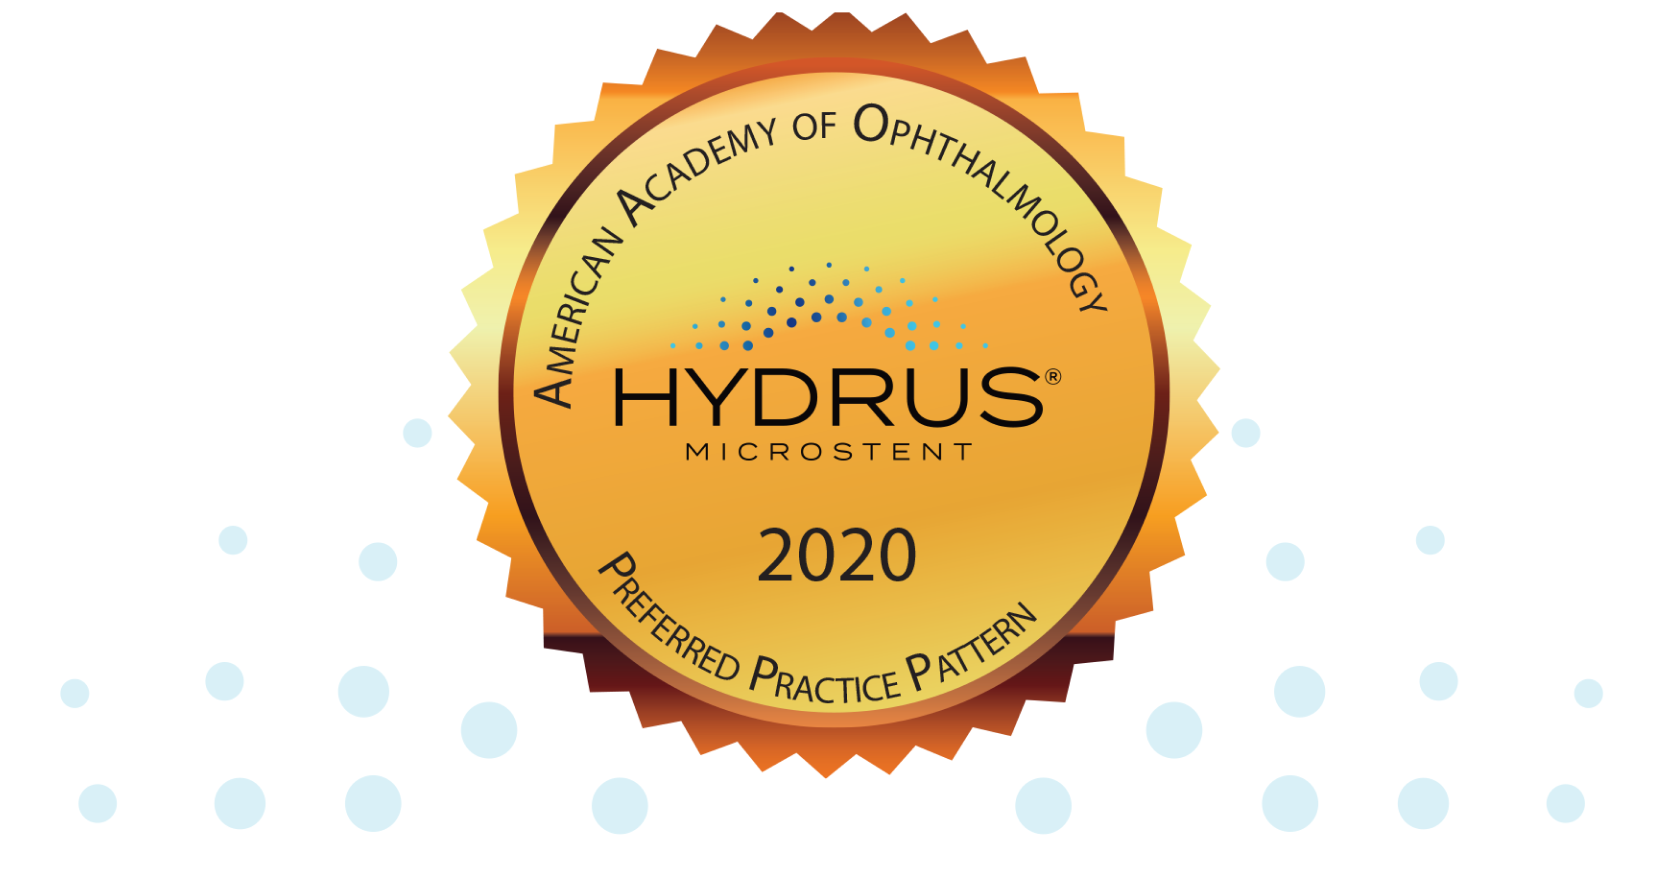 A gold seal indicating that the Hydrus Microstent received the highest quality of clinical data rating in the 2020 American Academy of Ophthalmology Preferred Practice Pattern guidelines.